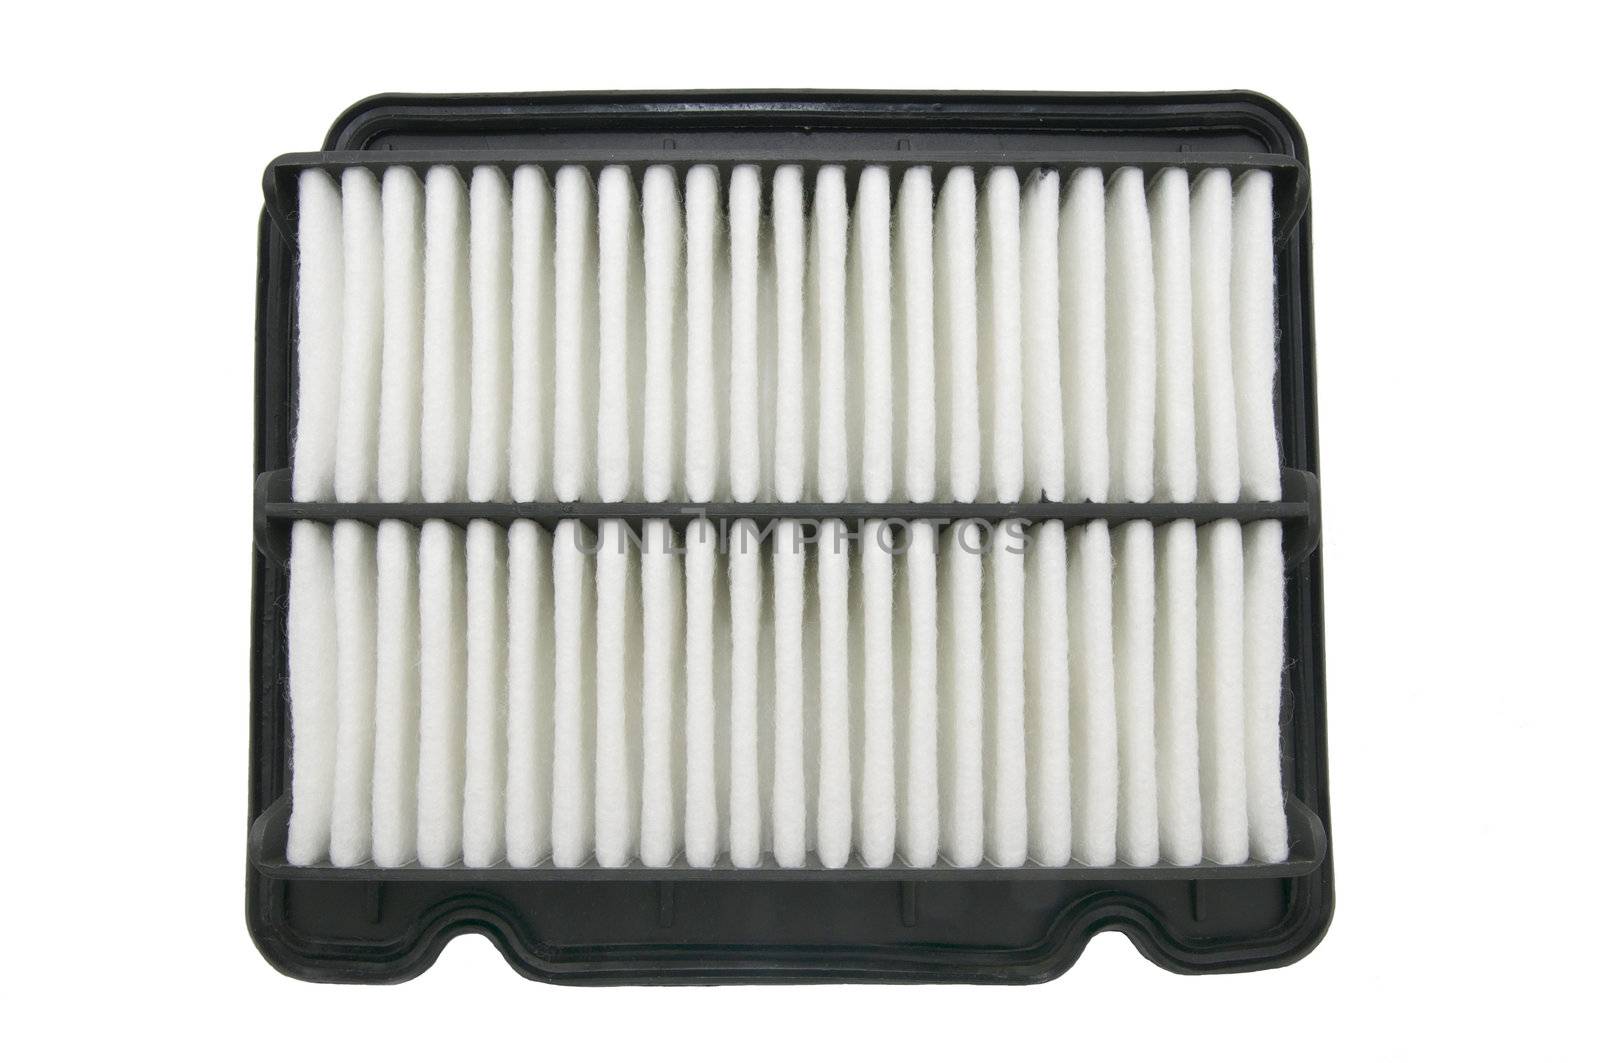 air filter to the car by Lester120